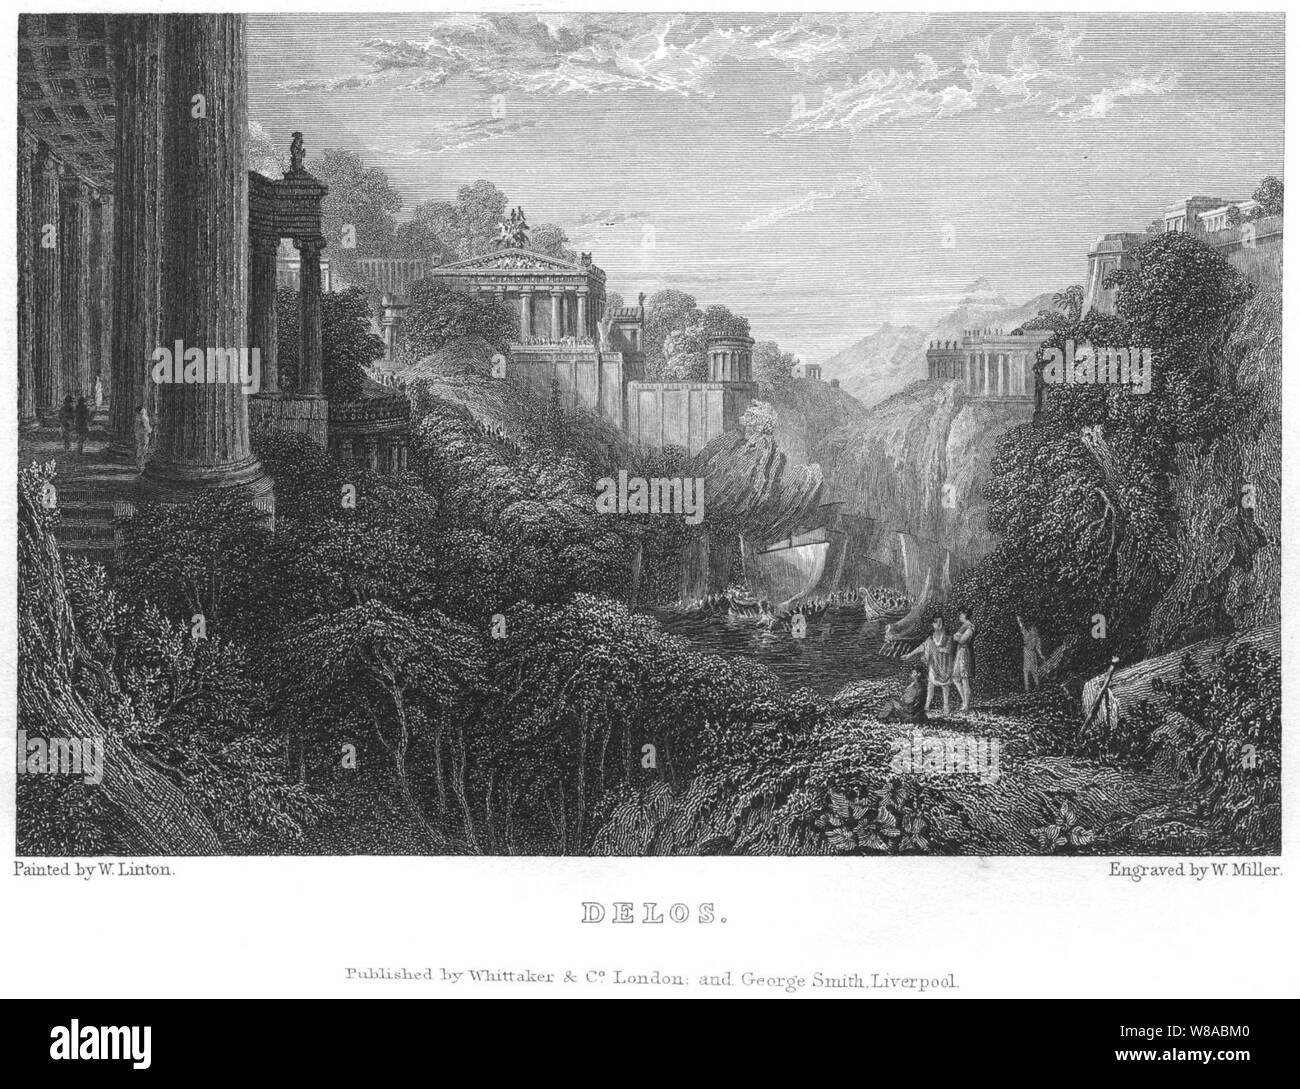 Delos engraving by William Miller after W Linton. Stock Photo